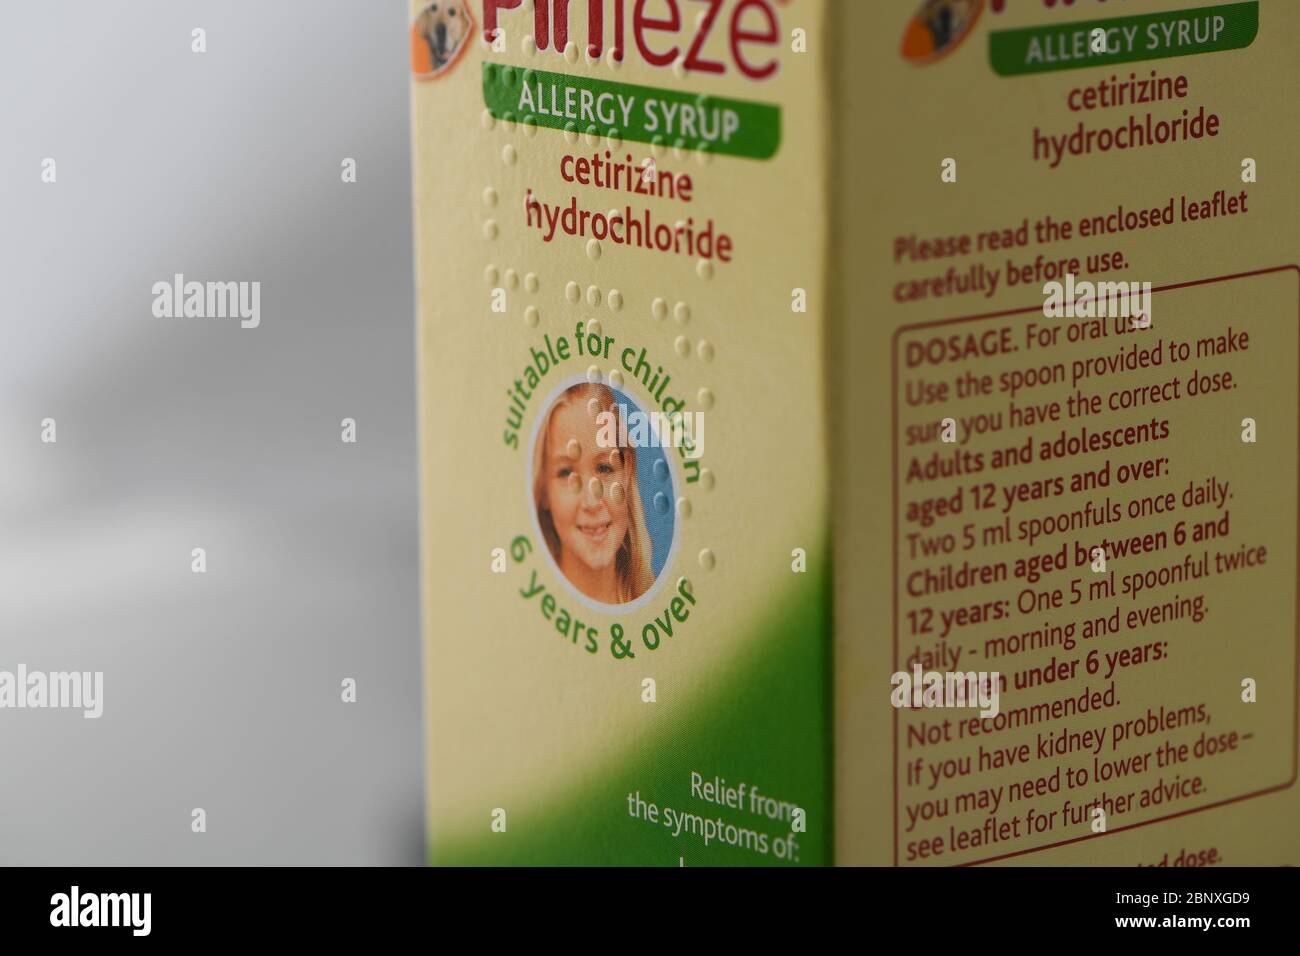 Piriteze allergy syrup packet close up image of brail markings on medicine box label to assist partially sighted and the blind. Stock Photo